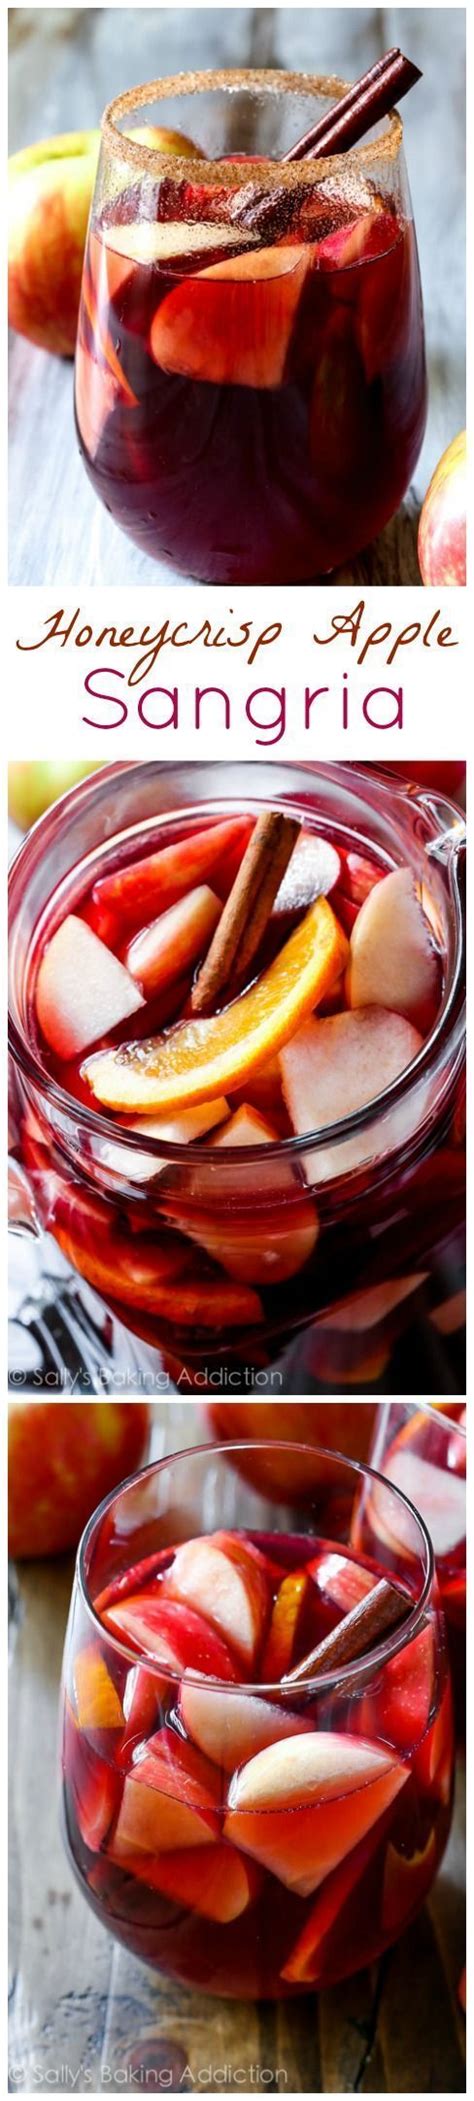 Are honeycrisp apples good for baking pies or cobbler? Honeycrisp Apple Sangria - this is THE drink to sip on ...